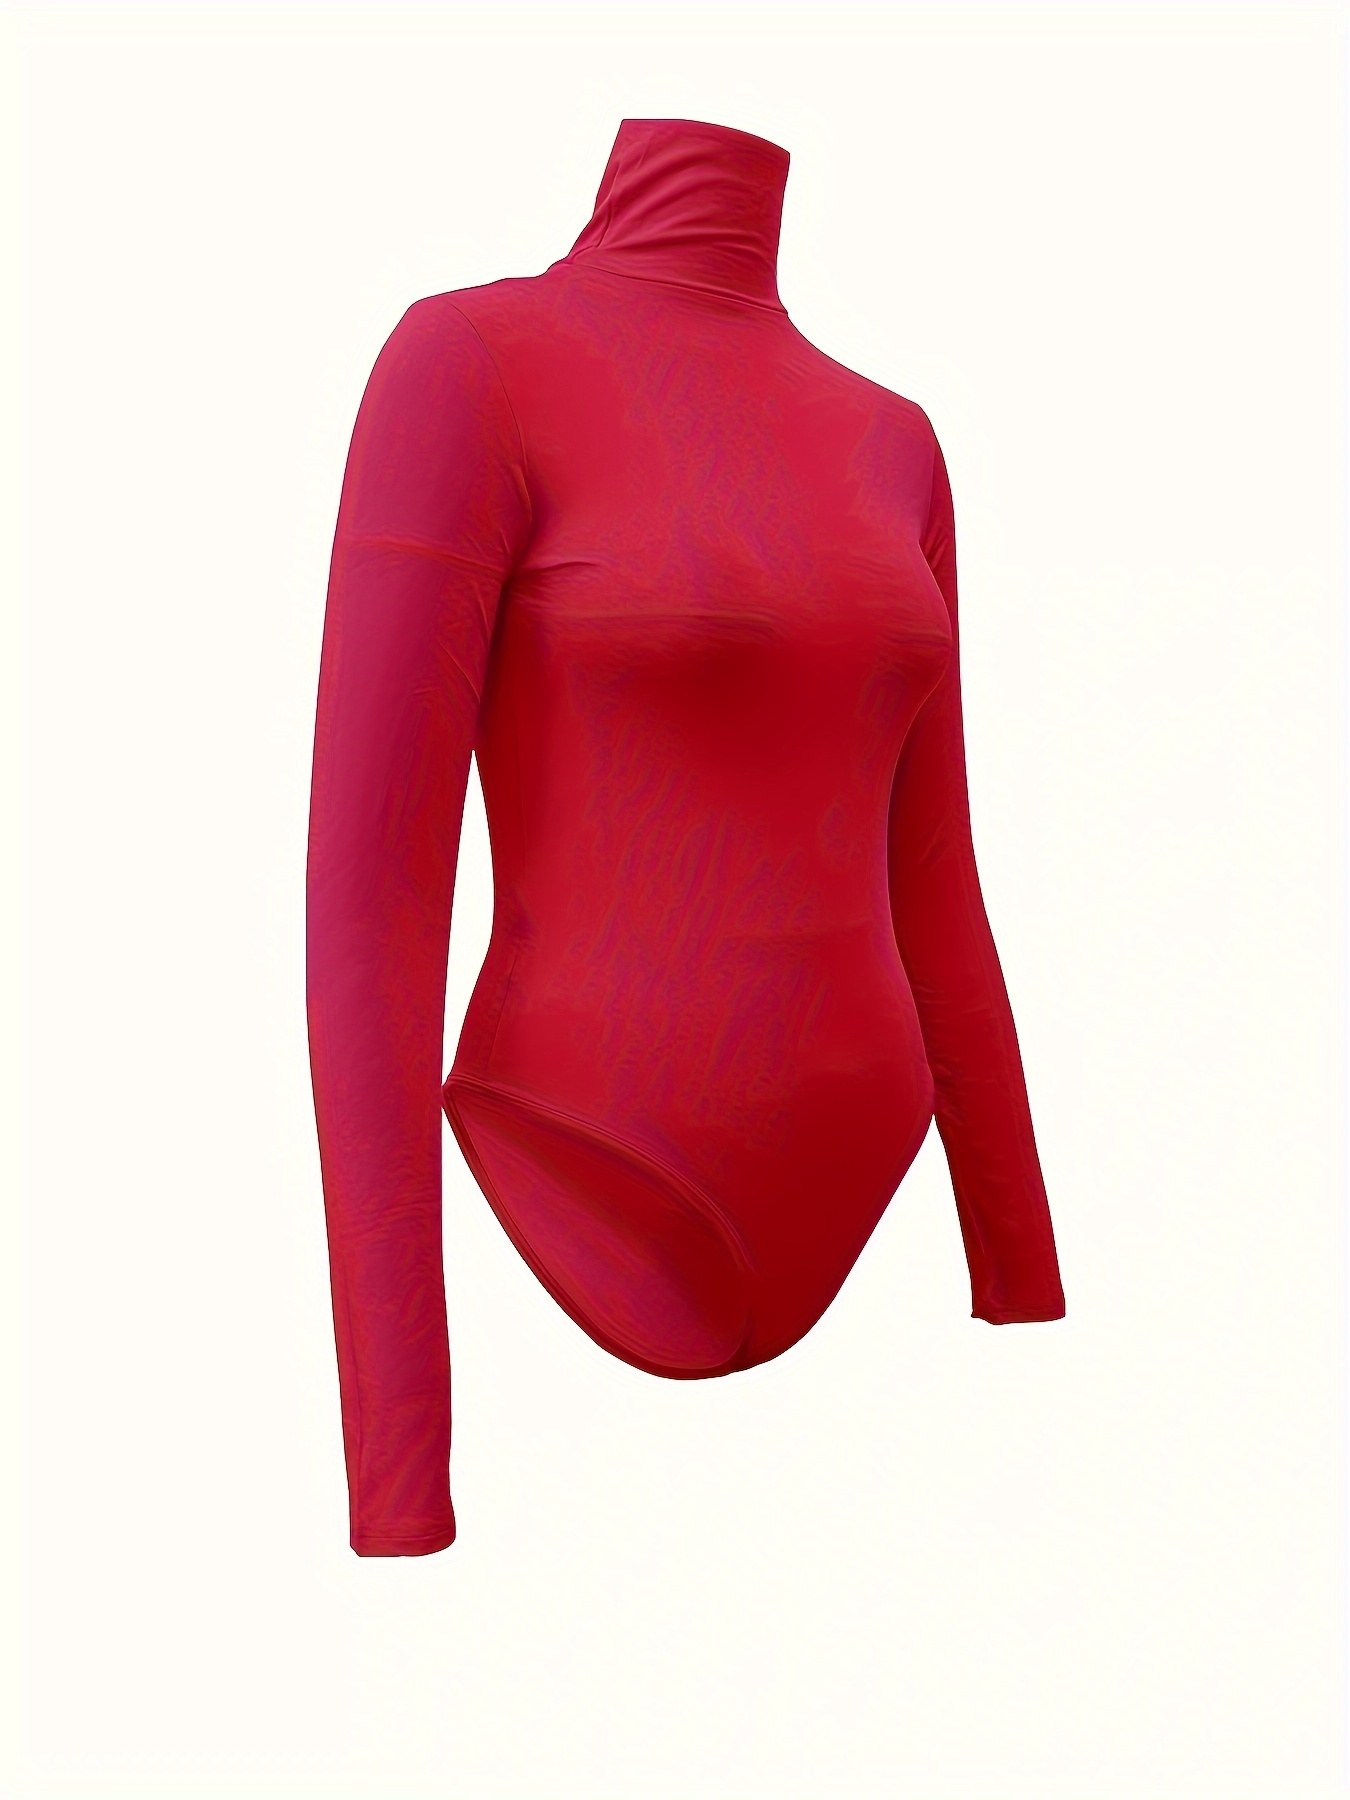 Red Bodysuits for Women